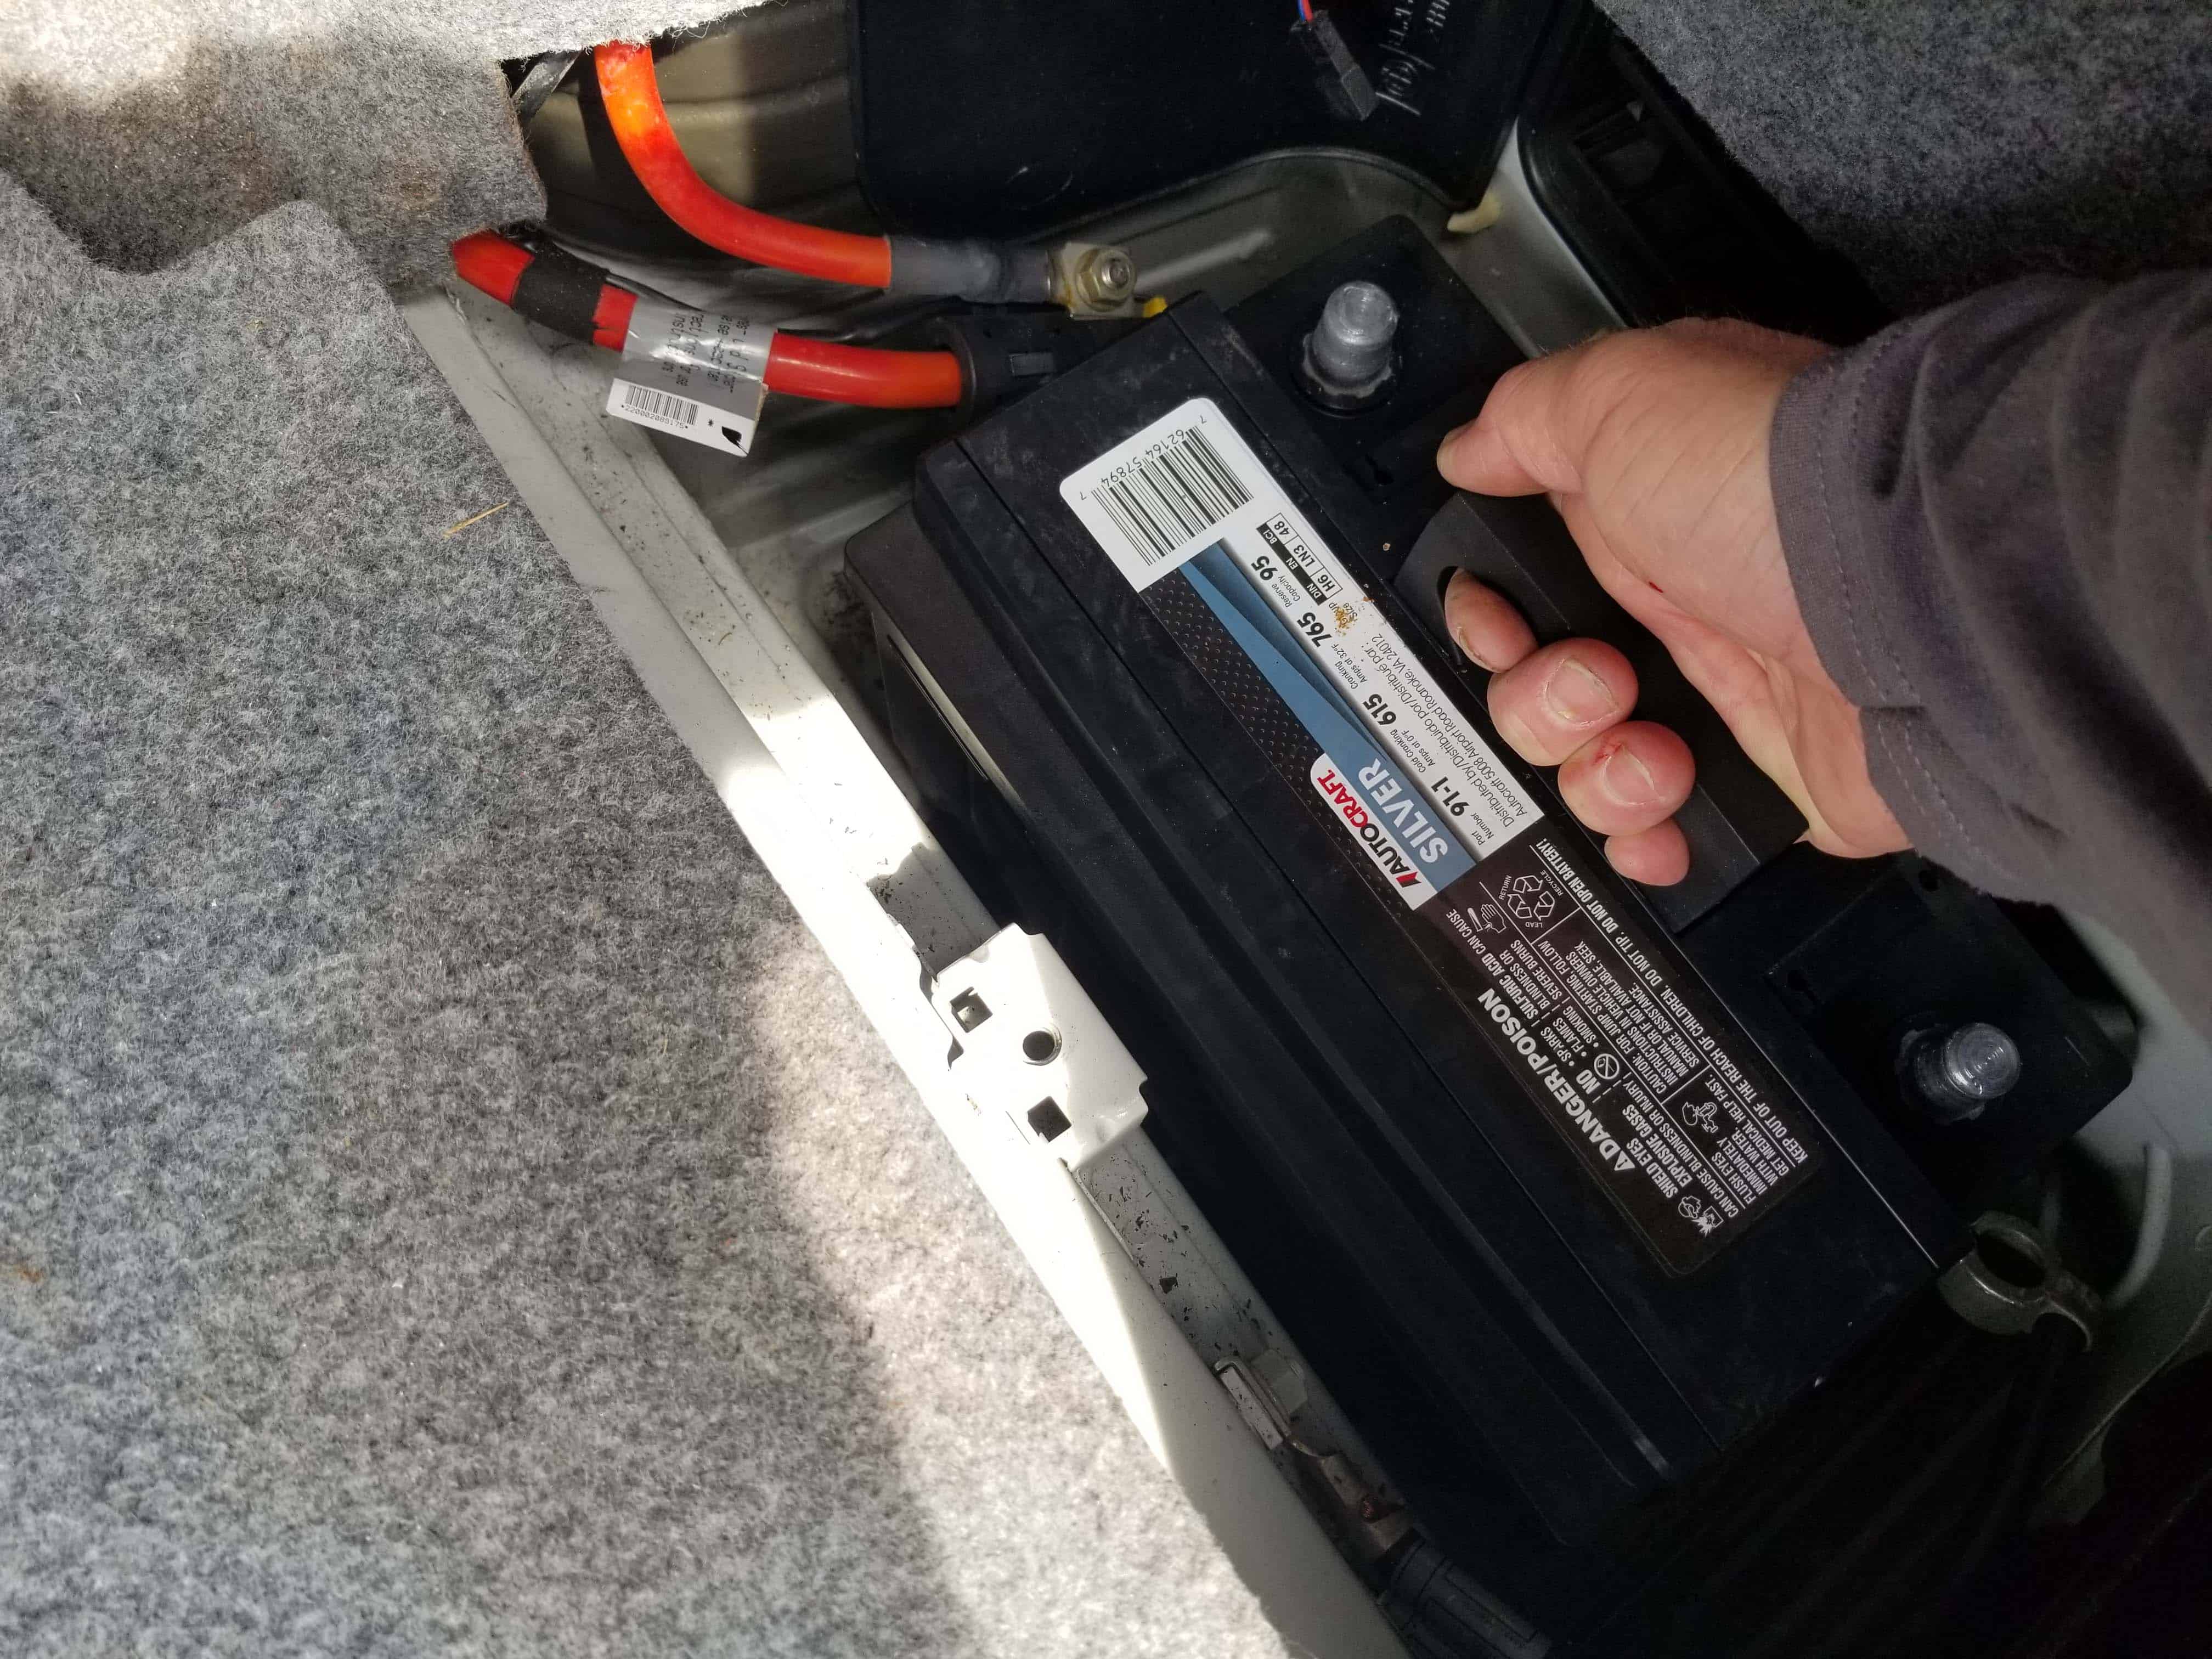 bmw e46 battery replacement - Grasp the battery and remove from the vehicle